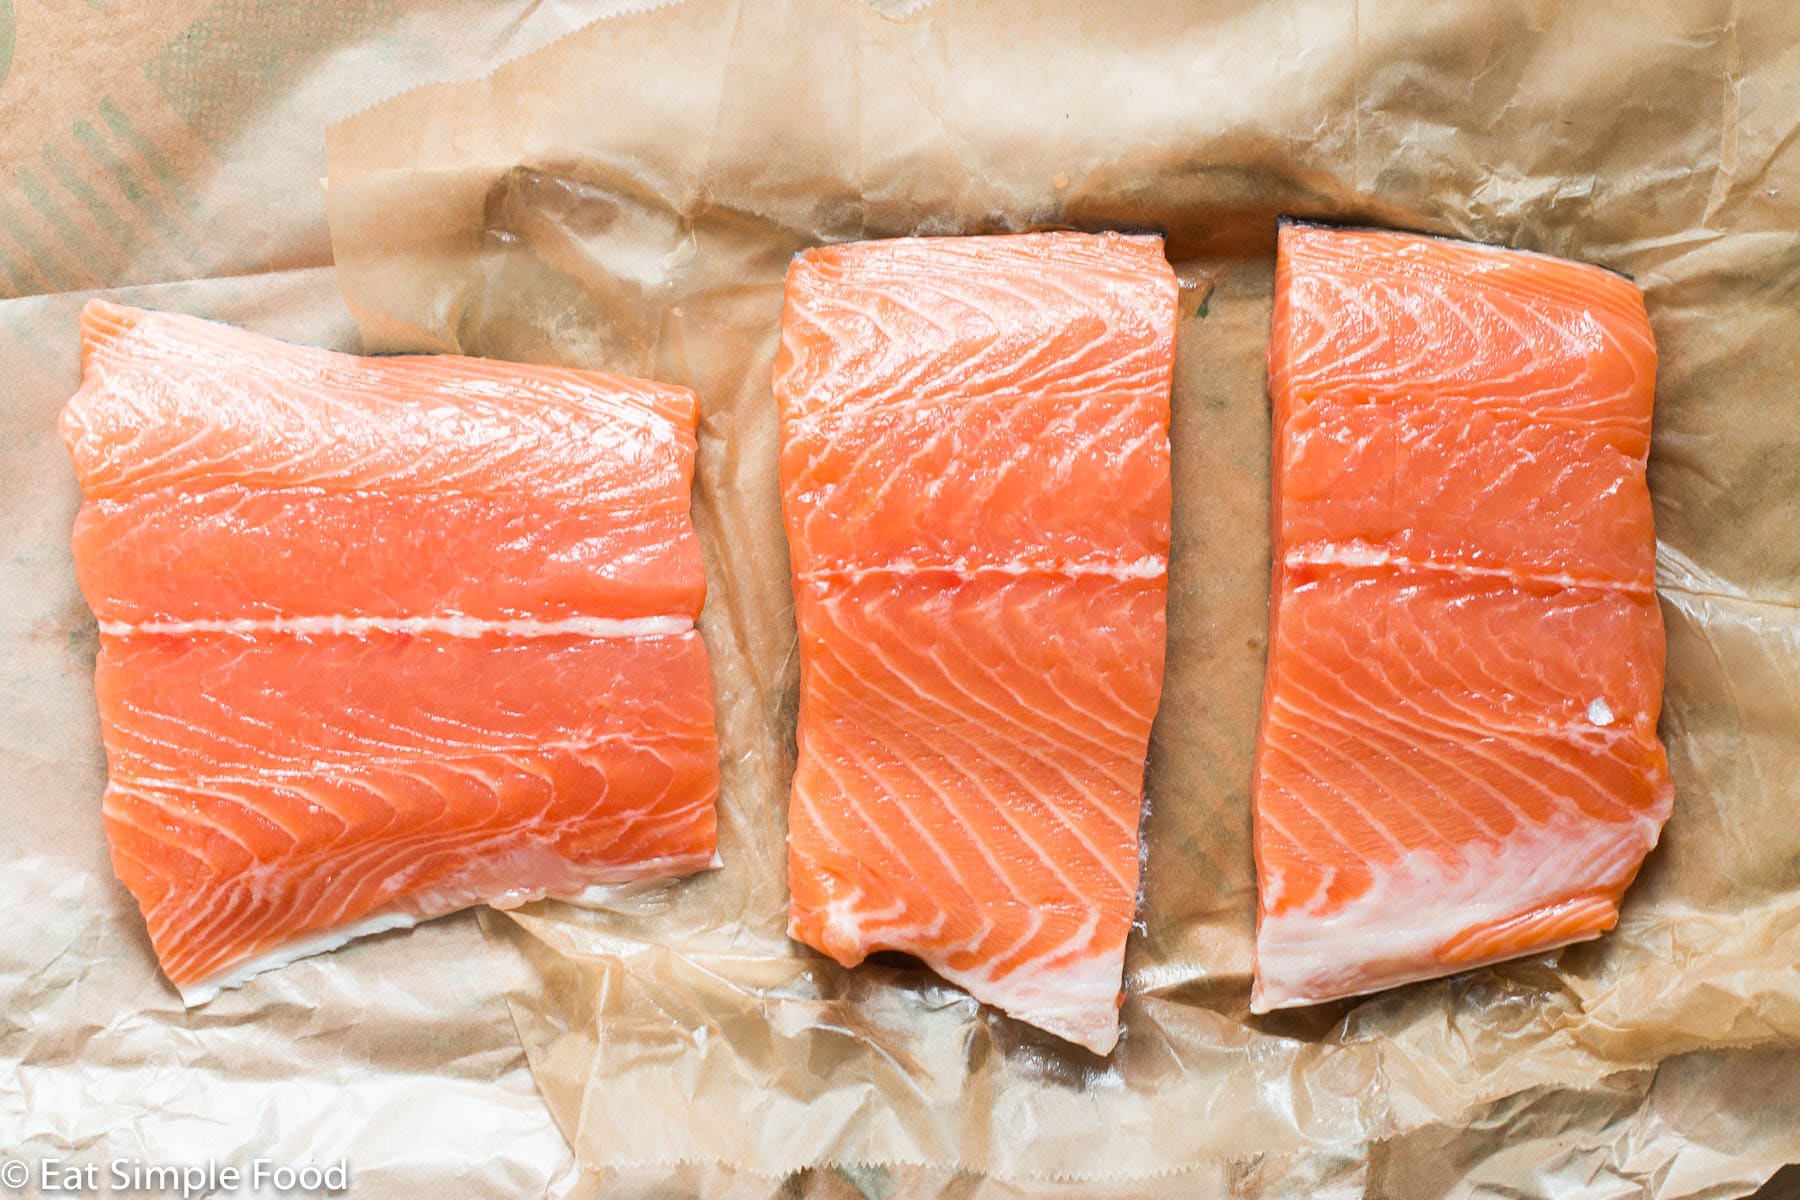 3 pieces of raw salmon fillets on butcher paper. Top down view.